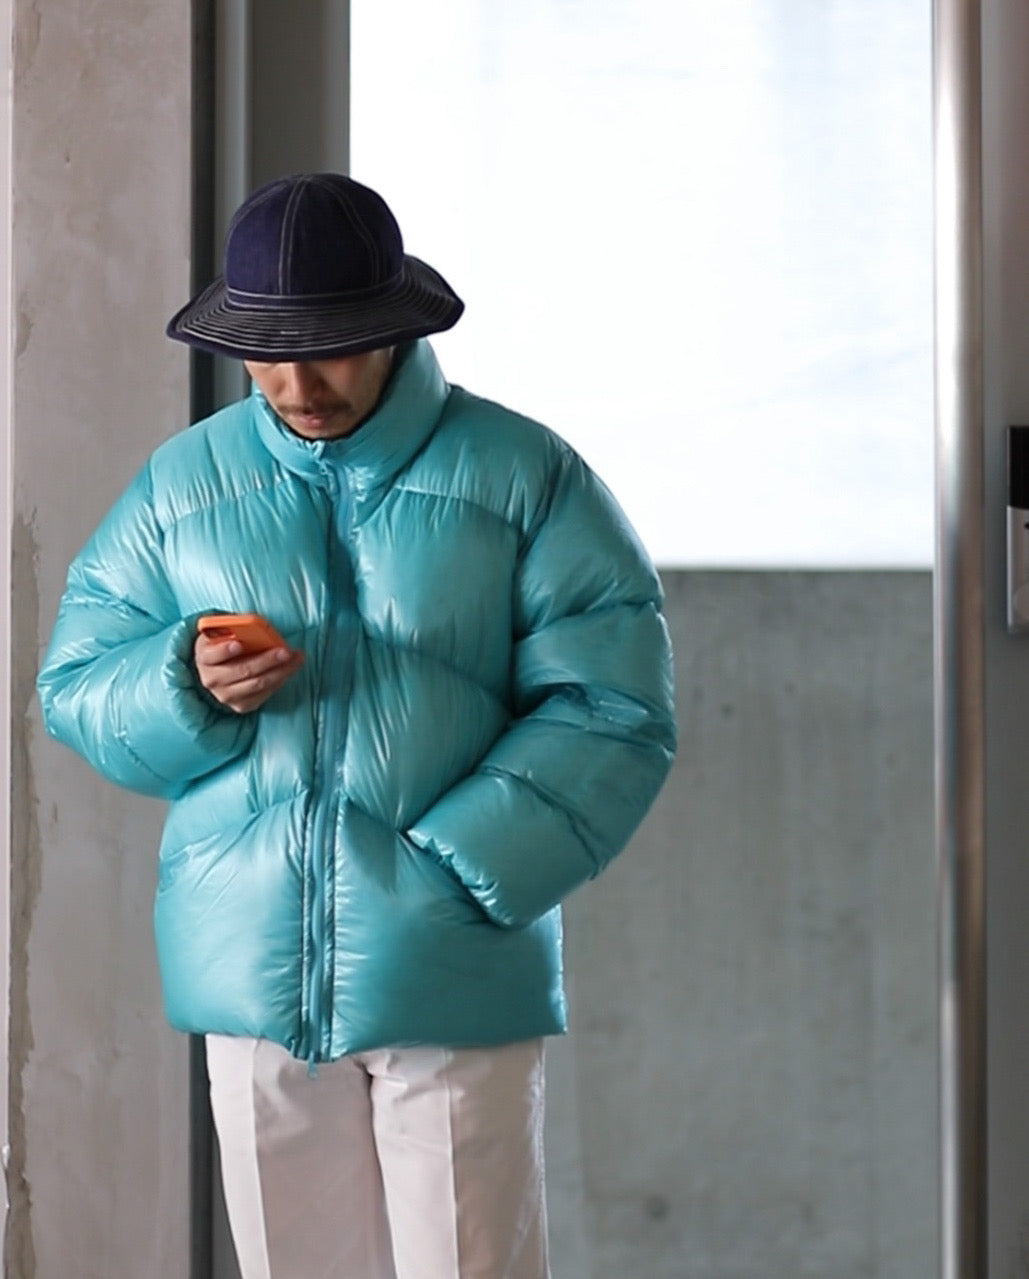 【 23FW 】RMFC NS JACKET / MINT（LIMITED COLOR）